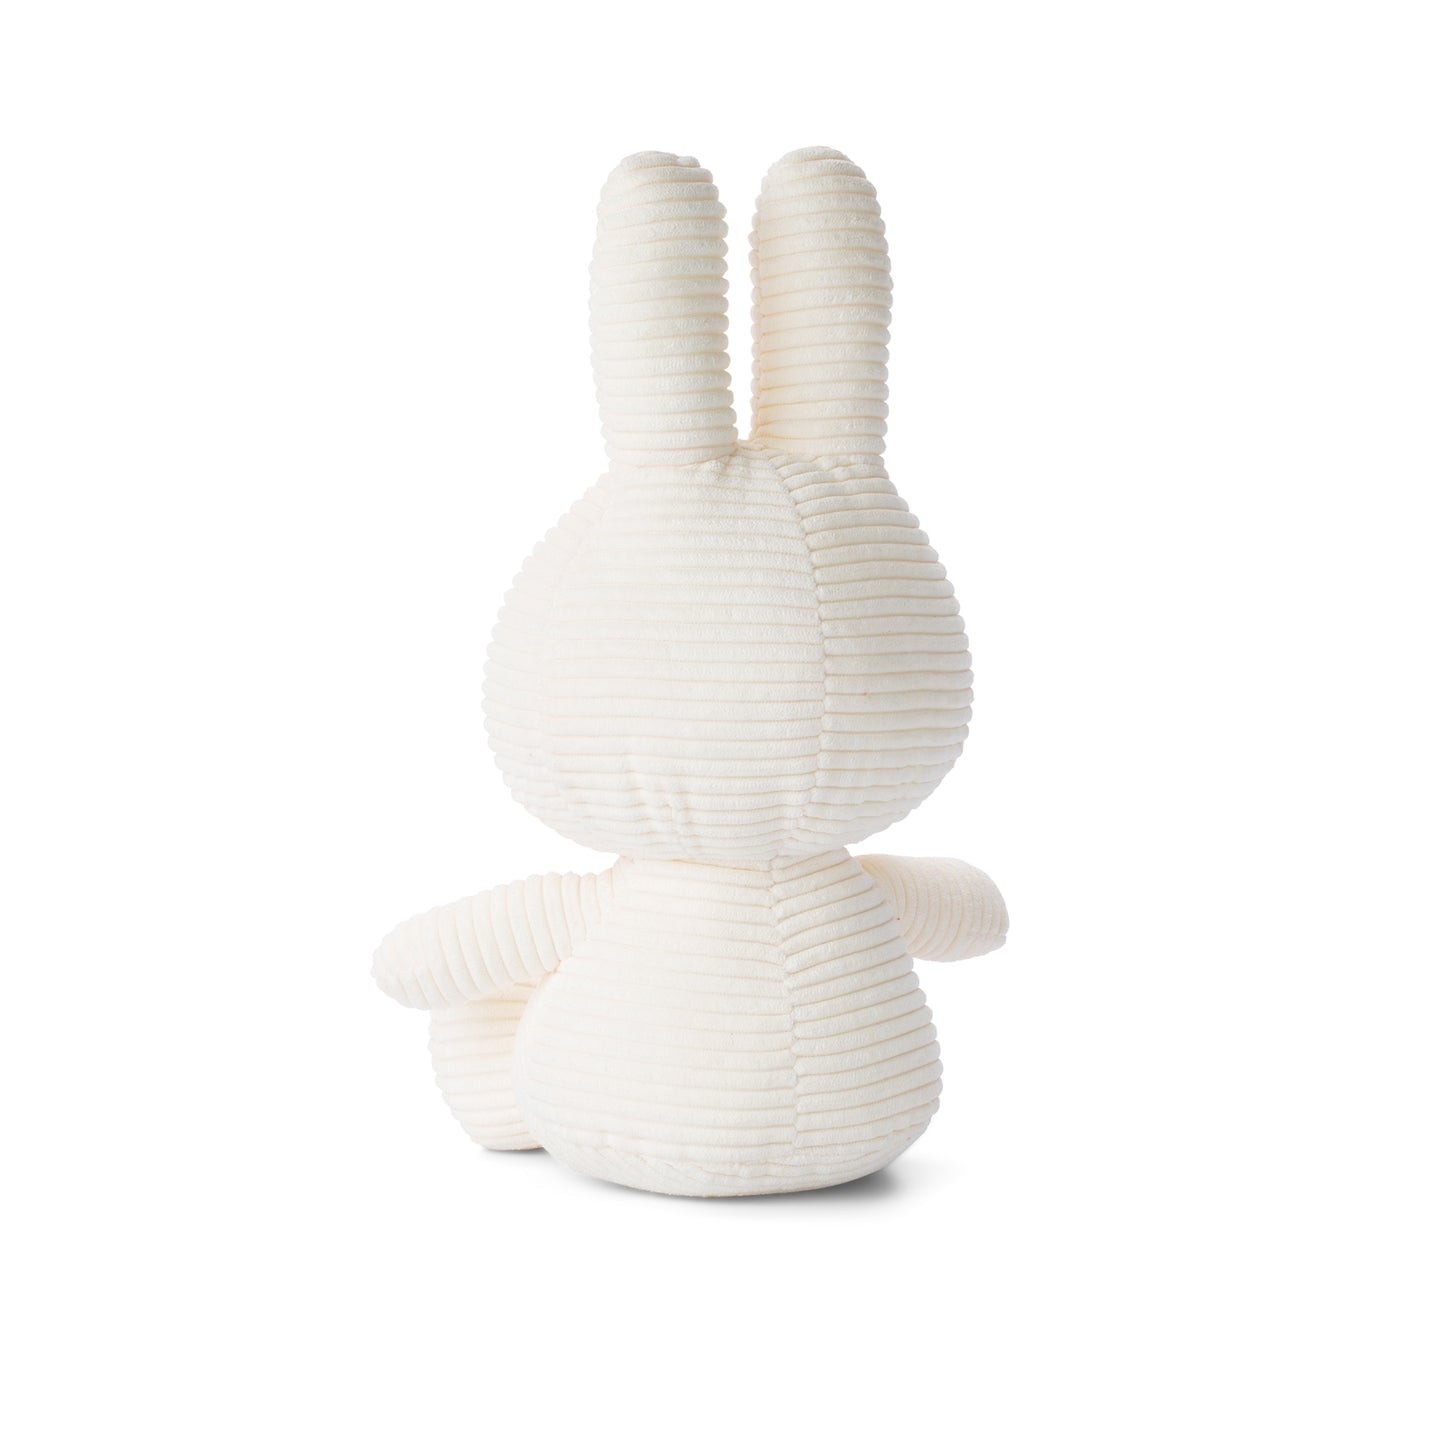 Back view of white Miffy the rabbit